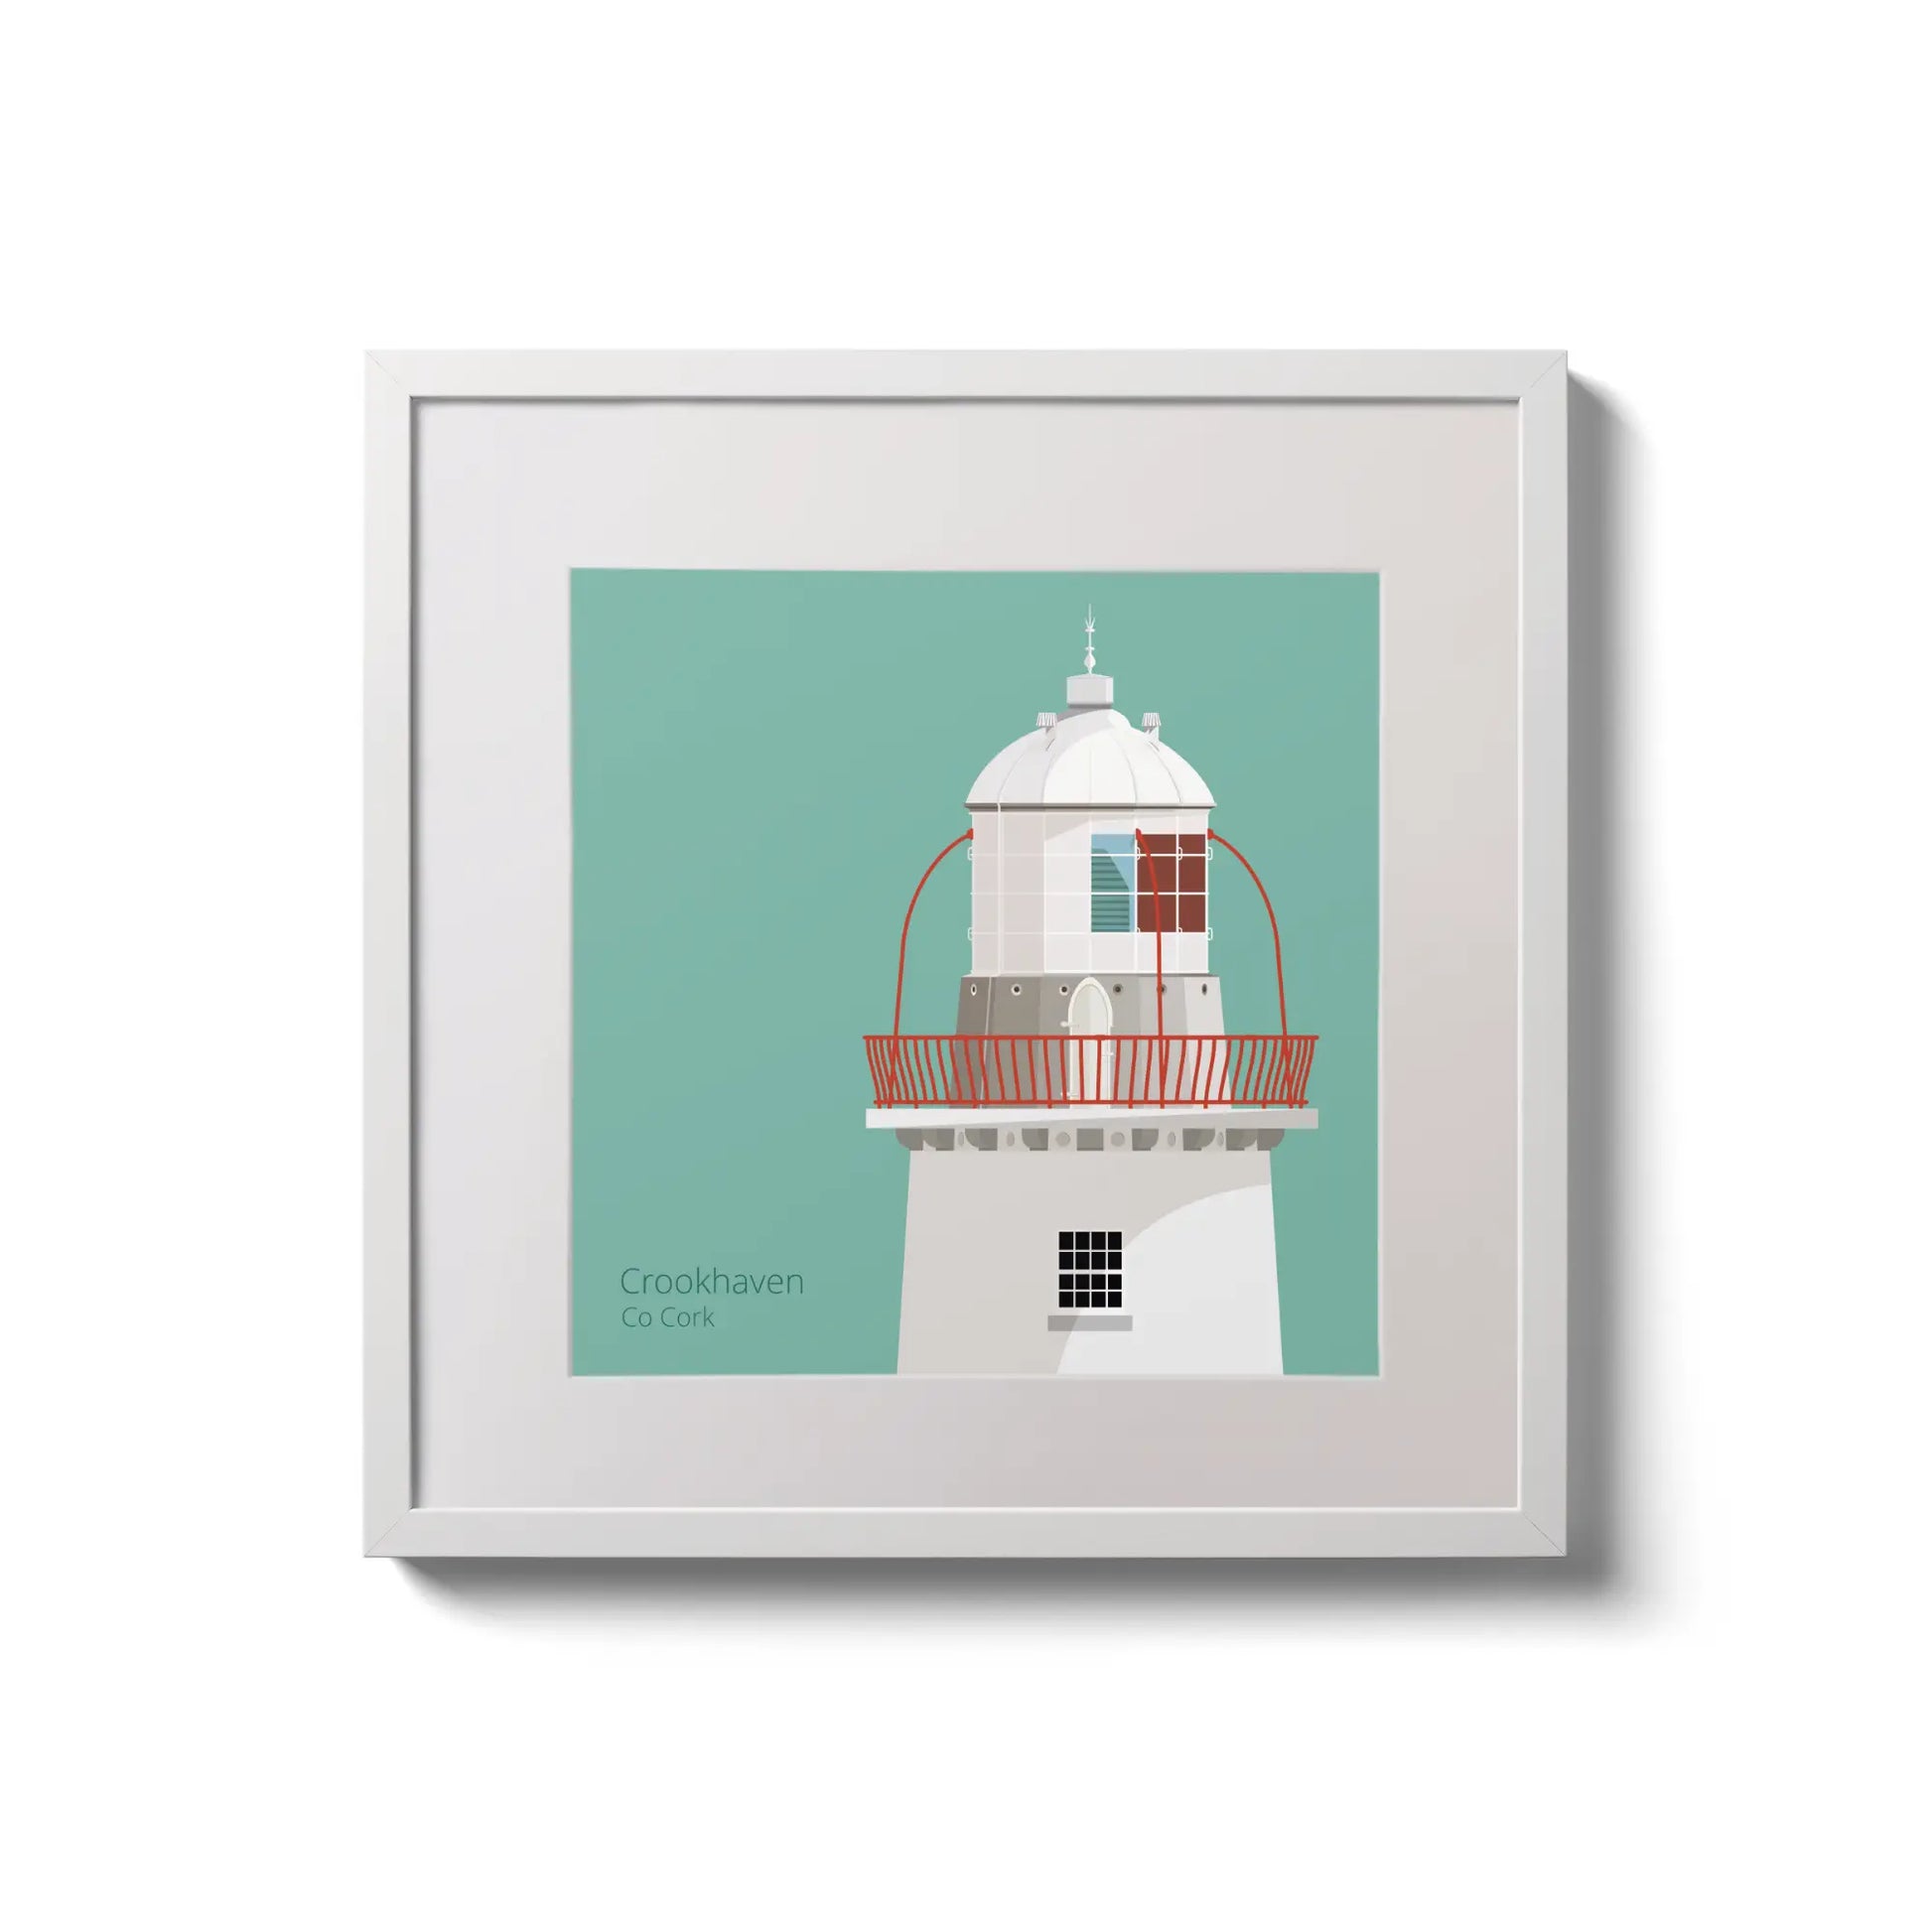 Illustration of Crookhaven lighthouse on an ocean green background,  in a white square frame measuring 20x20cm.